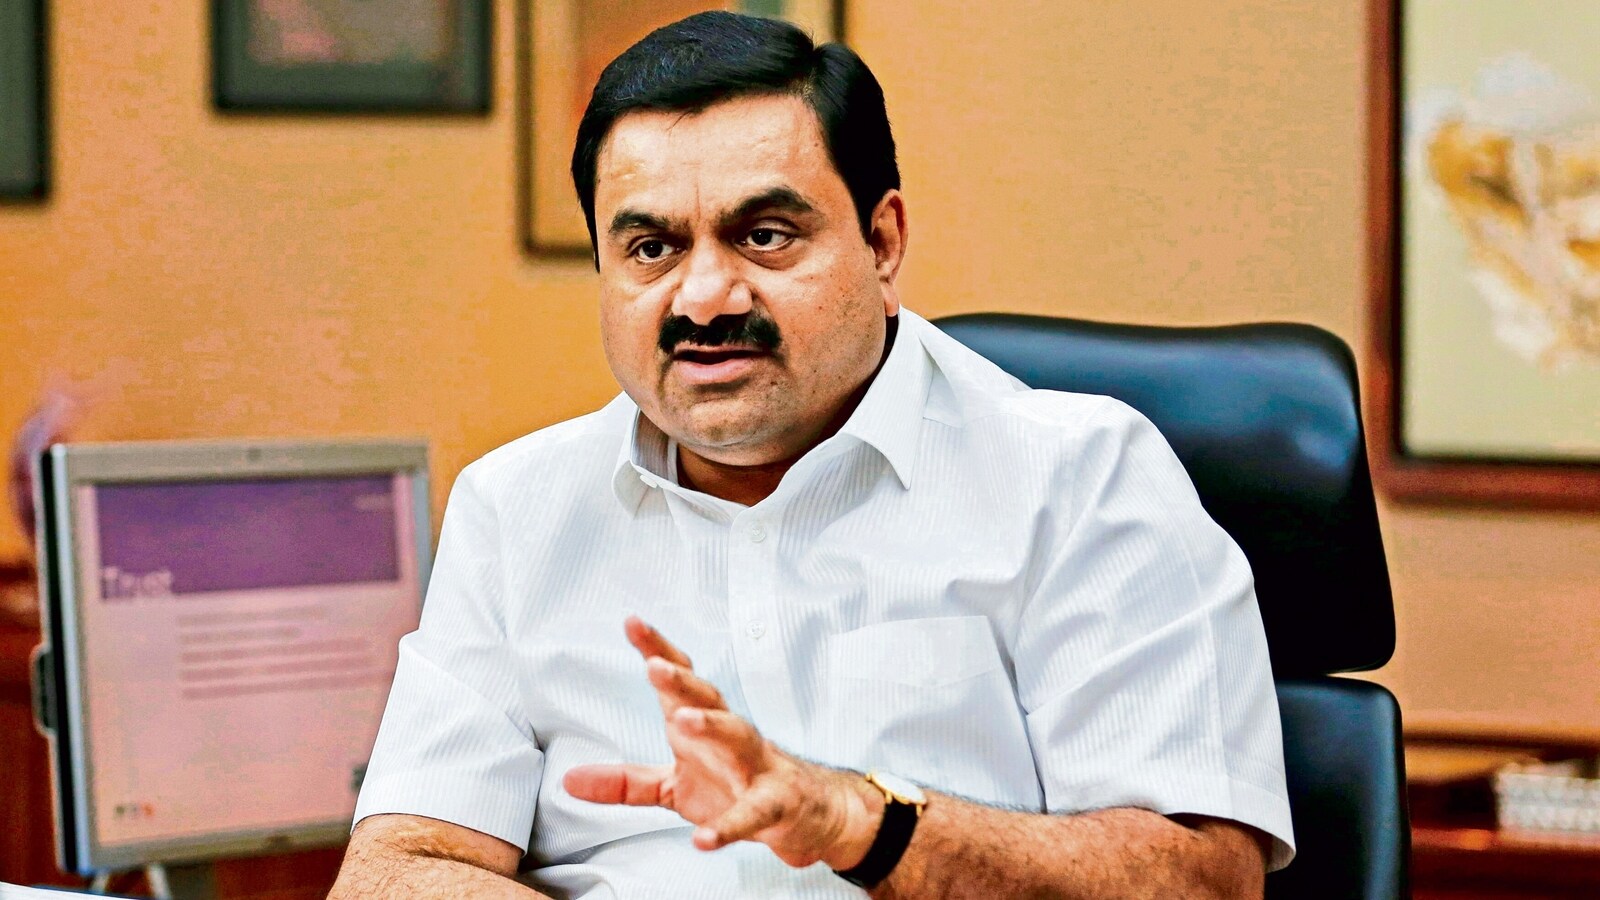 adani companies lose shares worth ₹1.91 trillion in 5 days. here's why - hindustan times